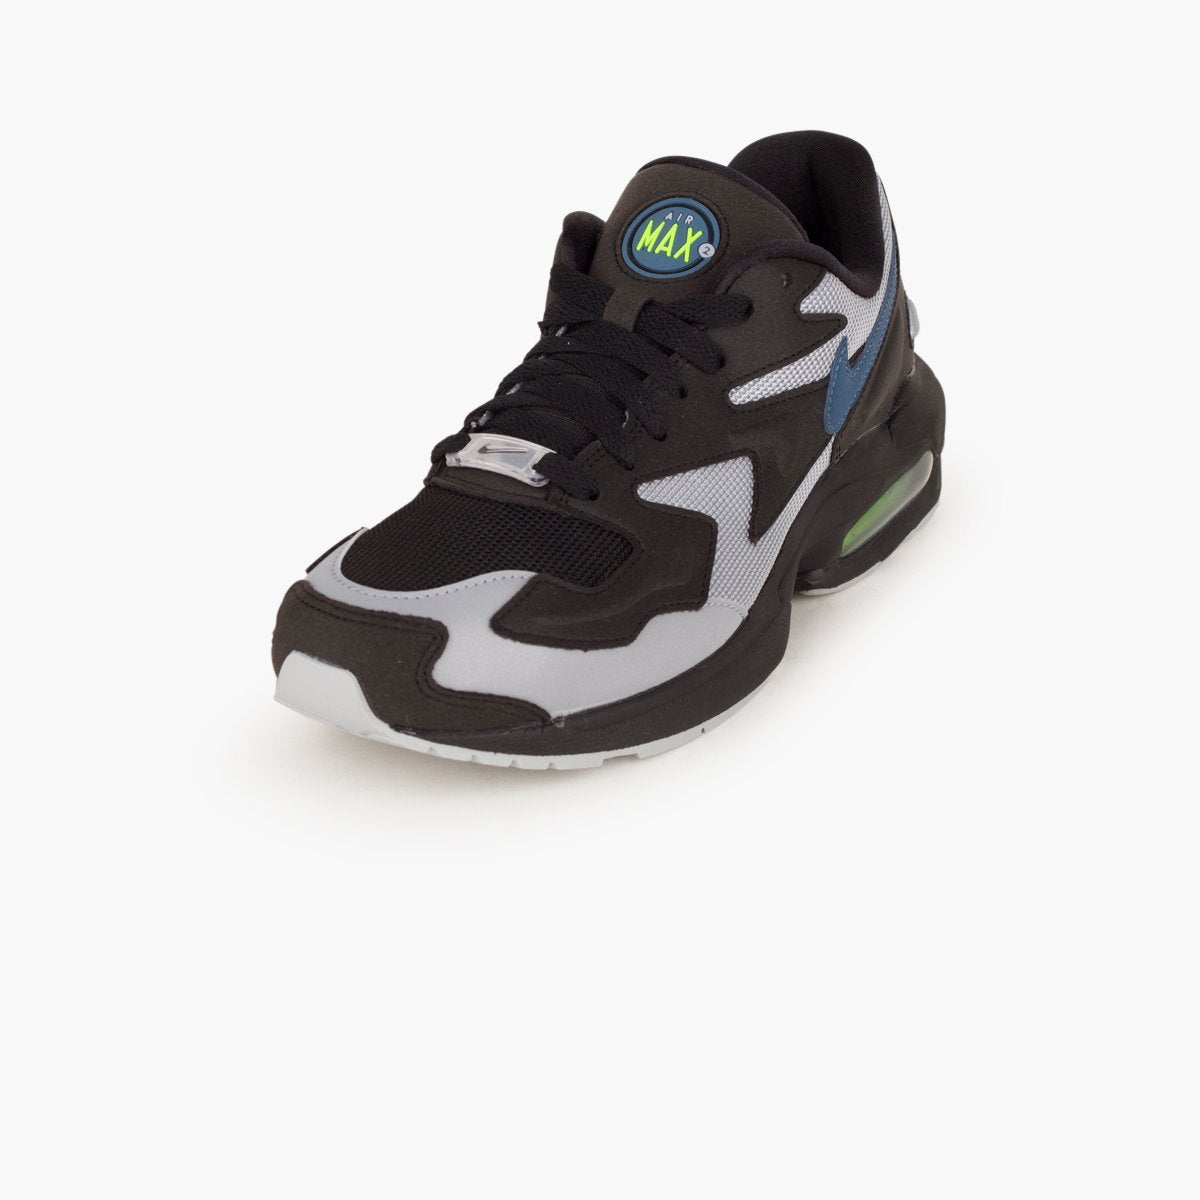 Nike Air Max2 Light-SUEDE Store